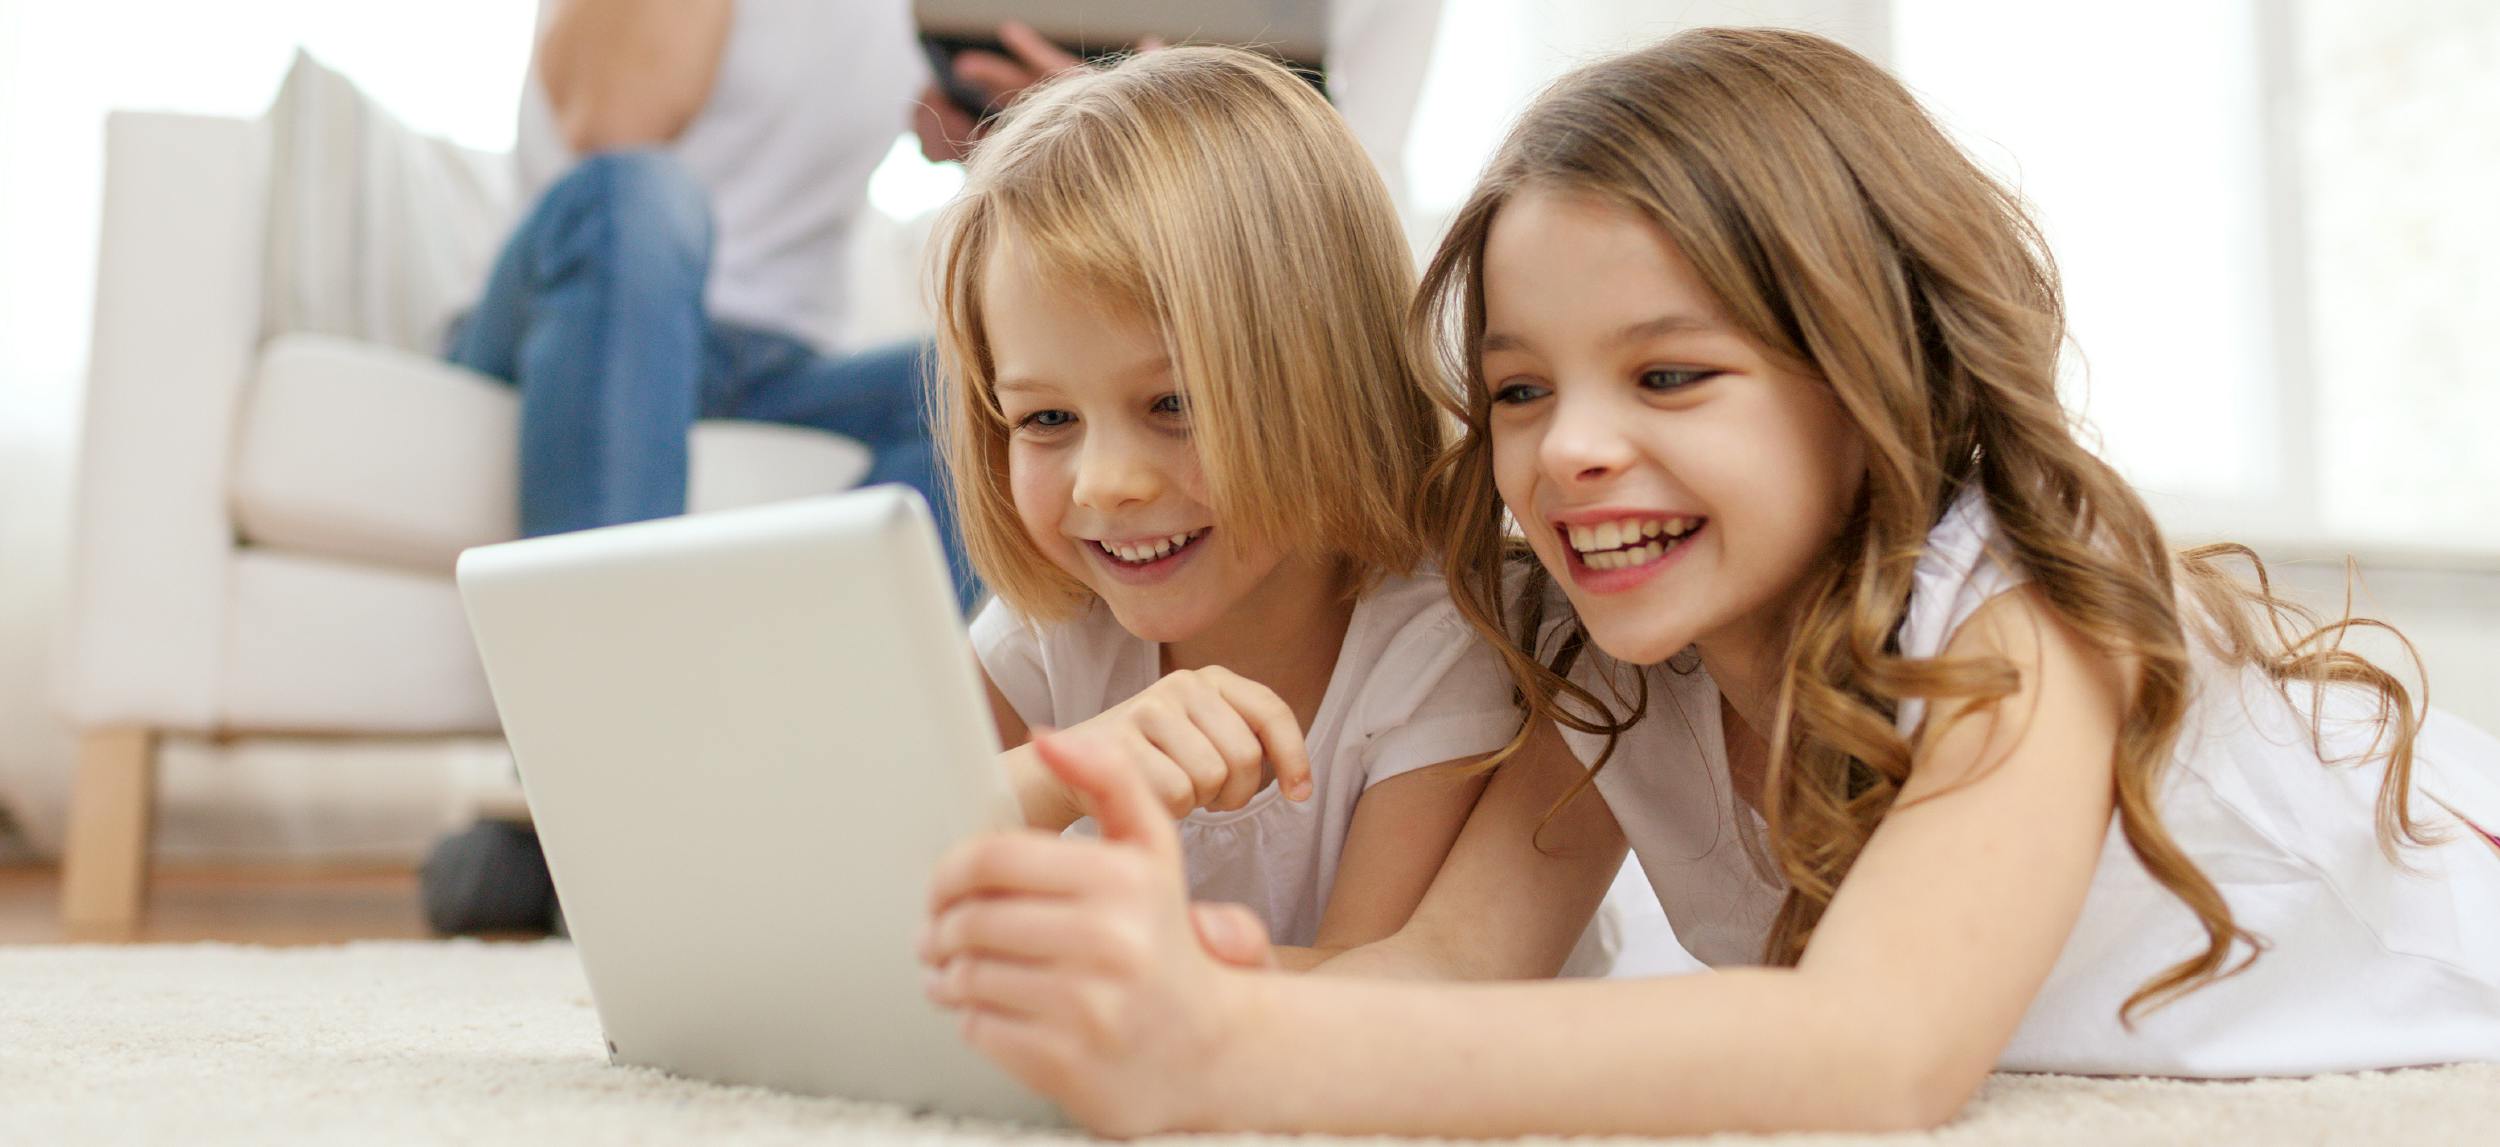 Image of 2 blond girls watching a screen